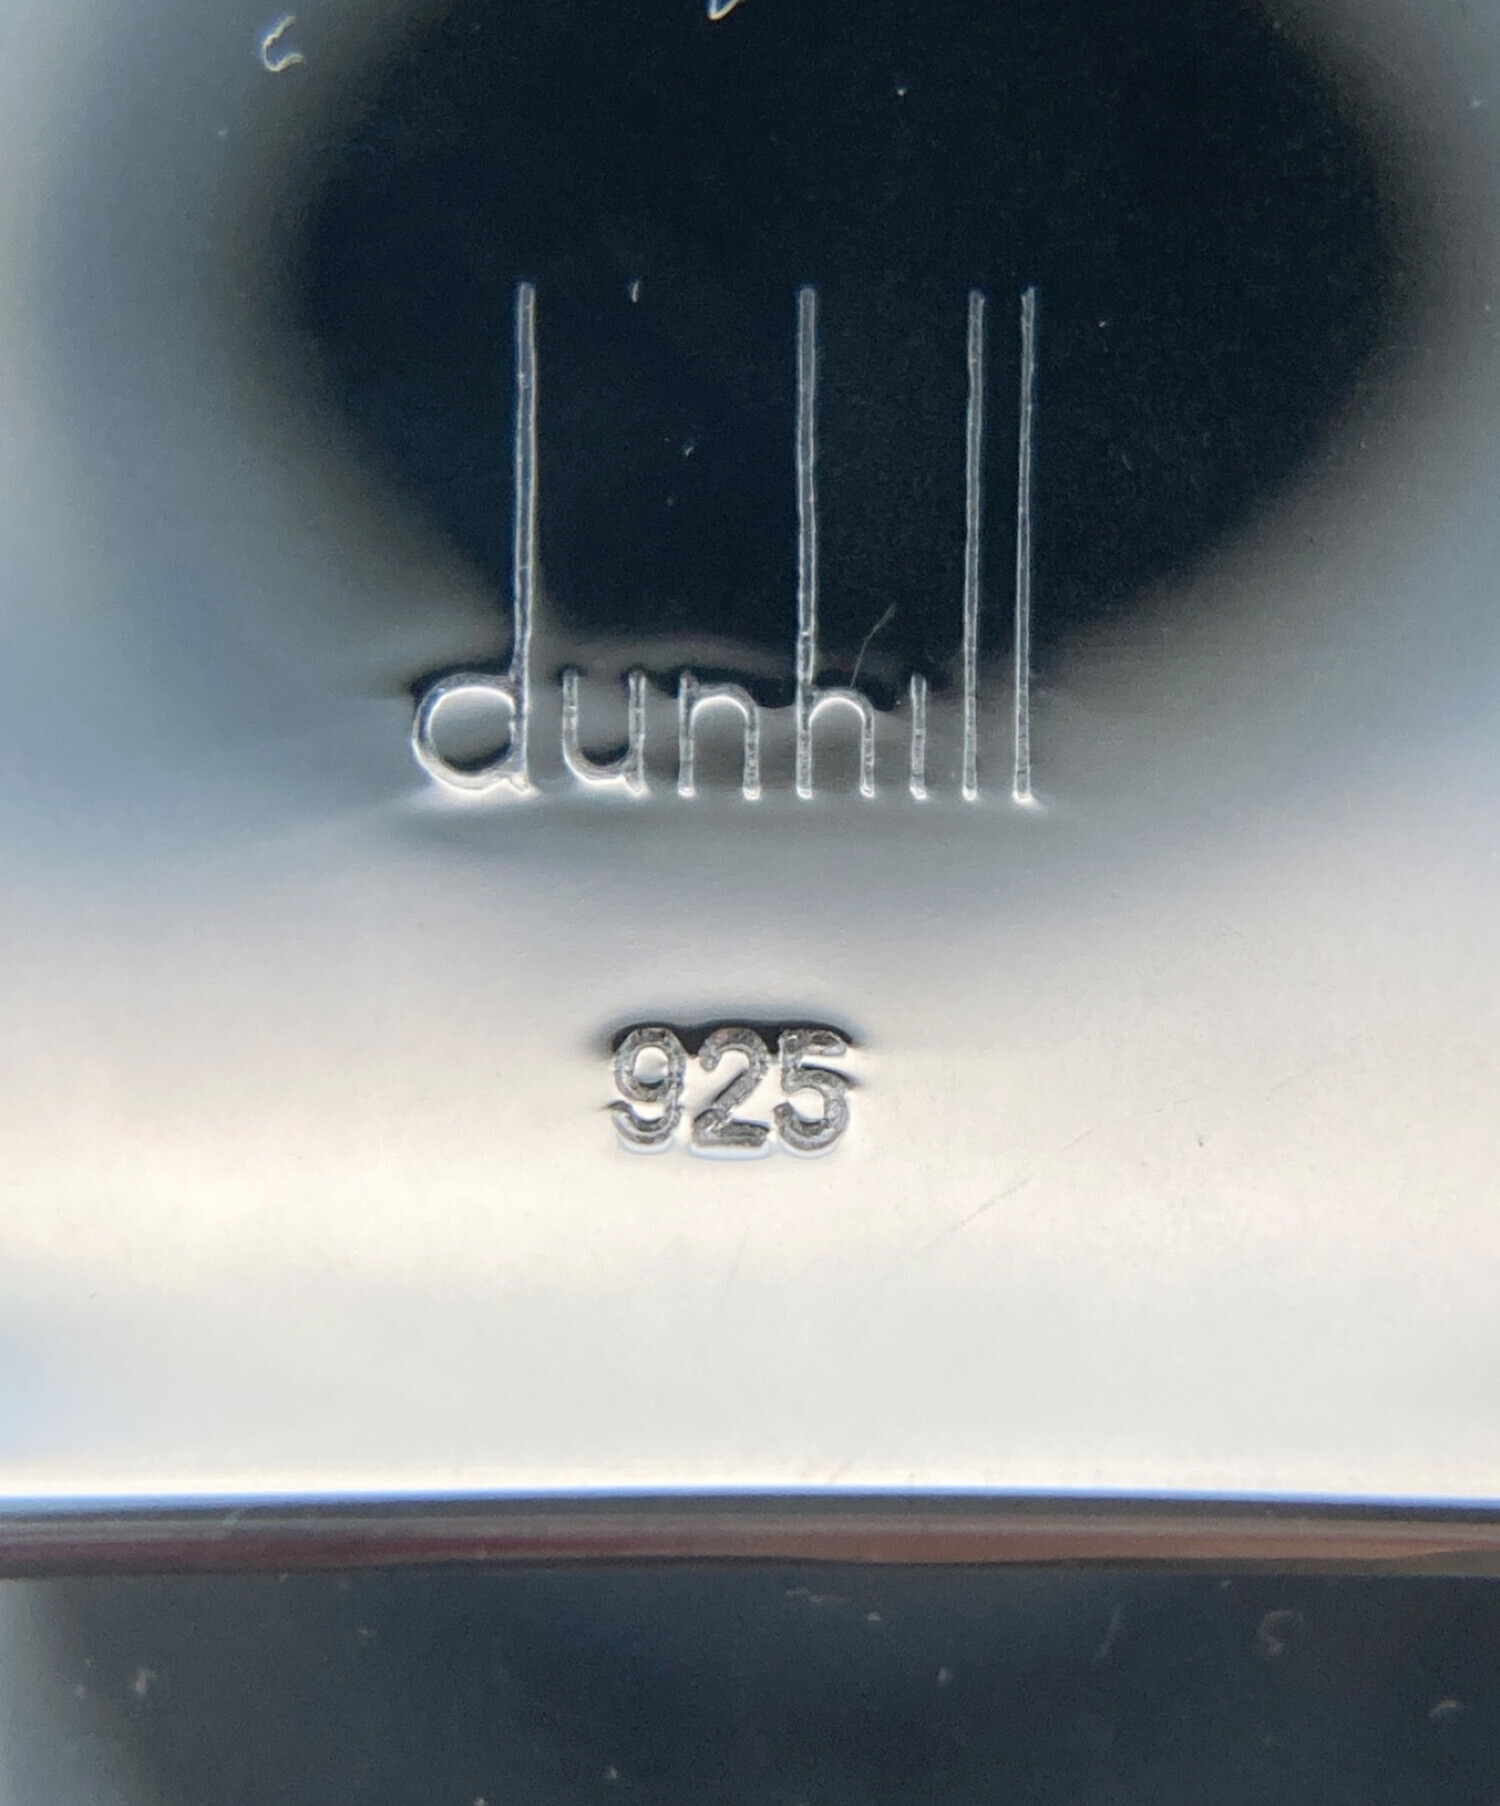 dunhill マネークリップ フェラーリ 44%OFF - n3quimica.com.br